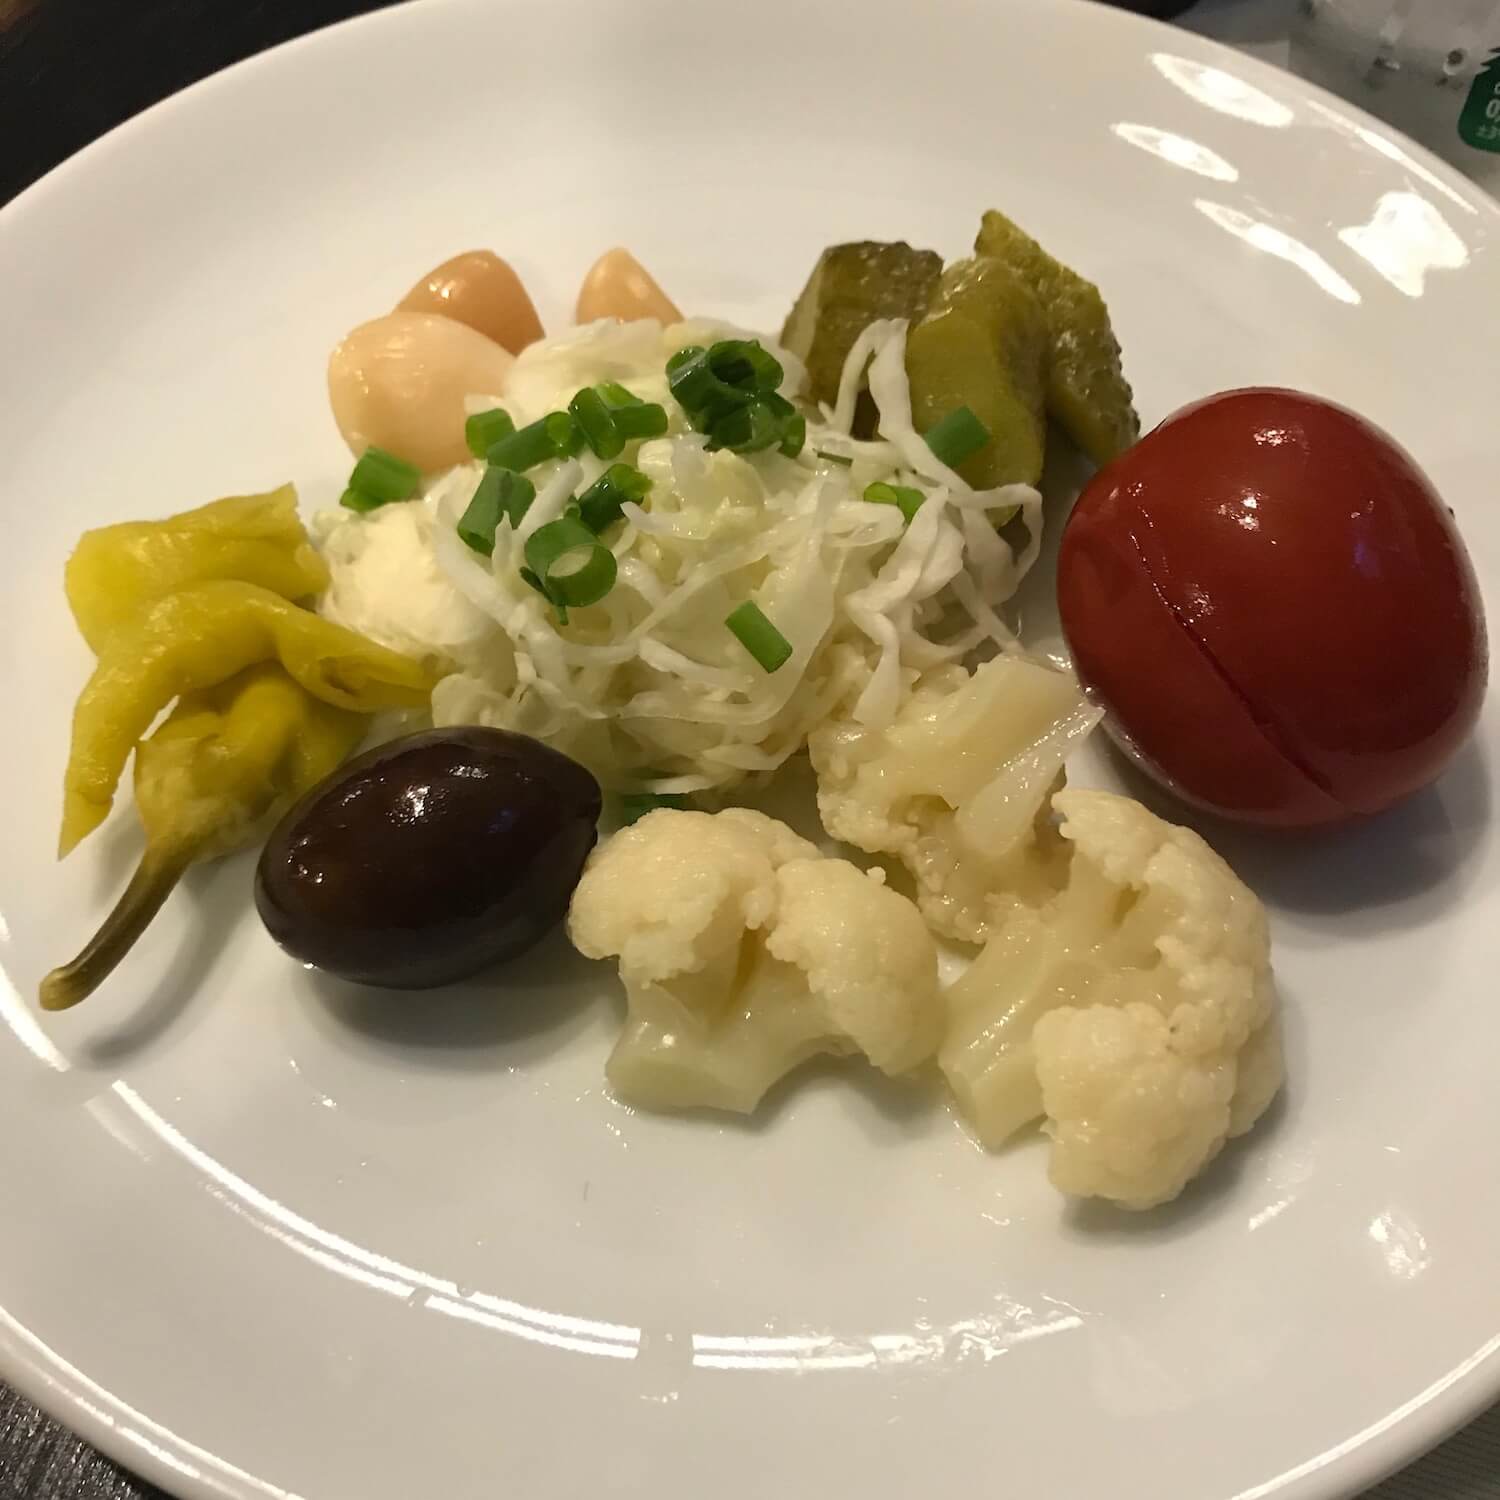 Pickled delights are very typical and abundant in Ukrainian cuisine.  All of these were delicious.  Sportykach restaurant.